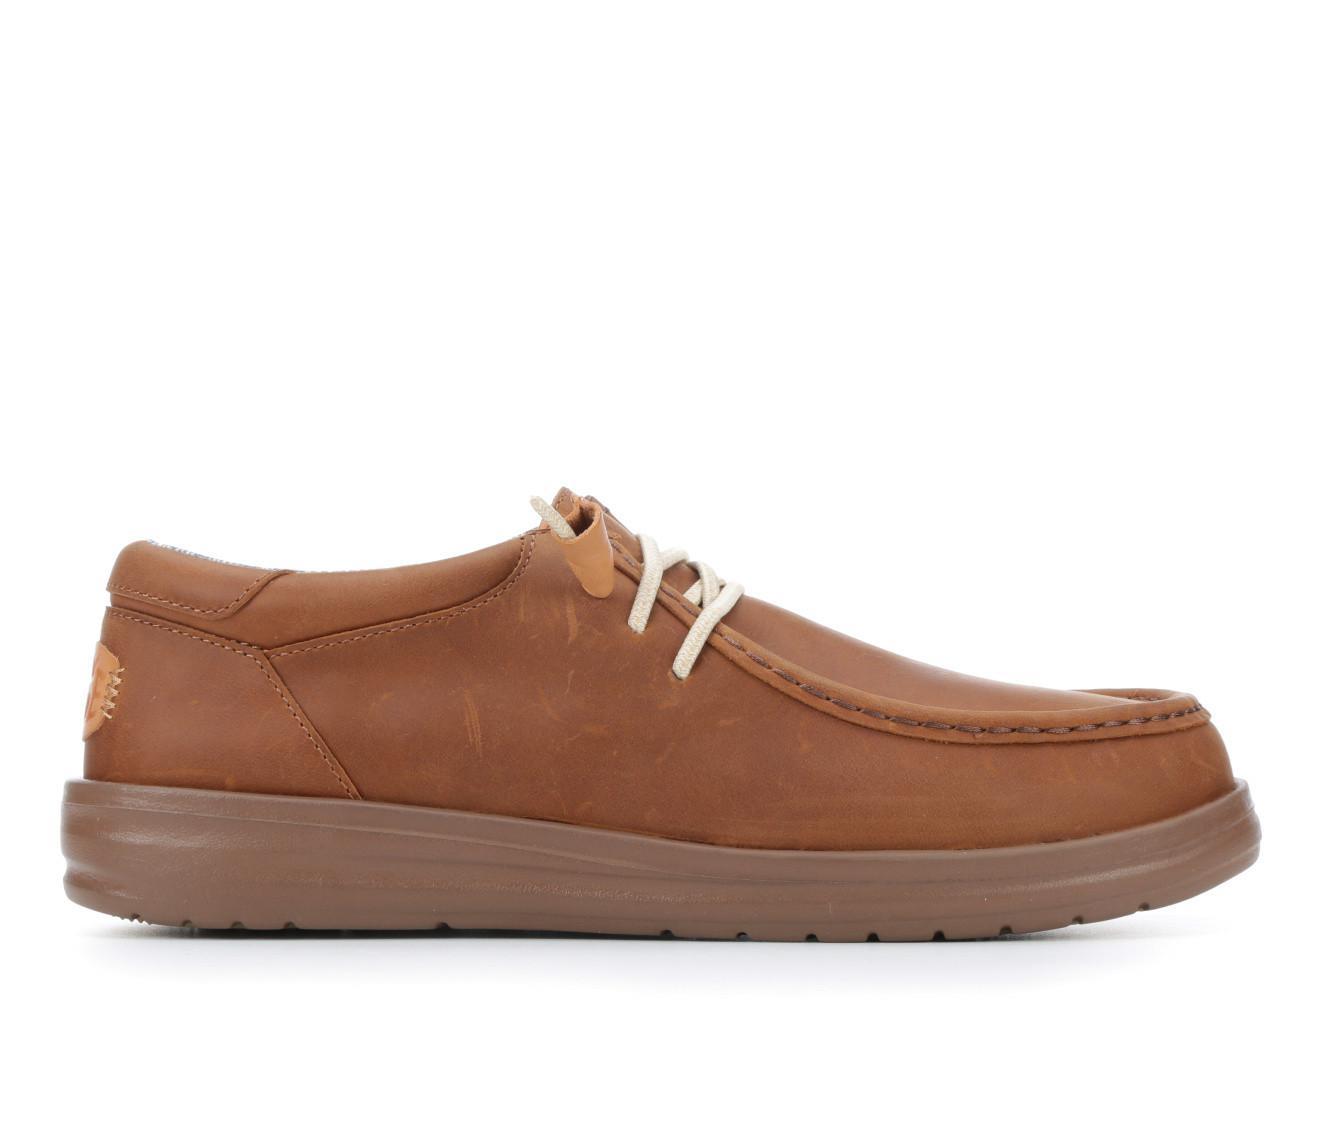 Men's HEYDUDE Wally Grip Leather Casual Shoes